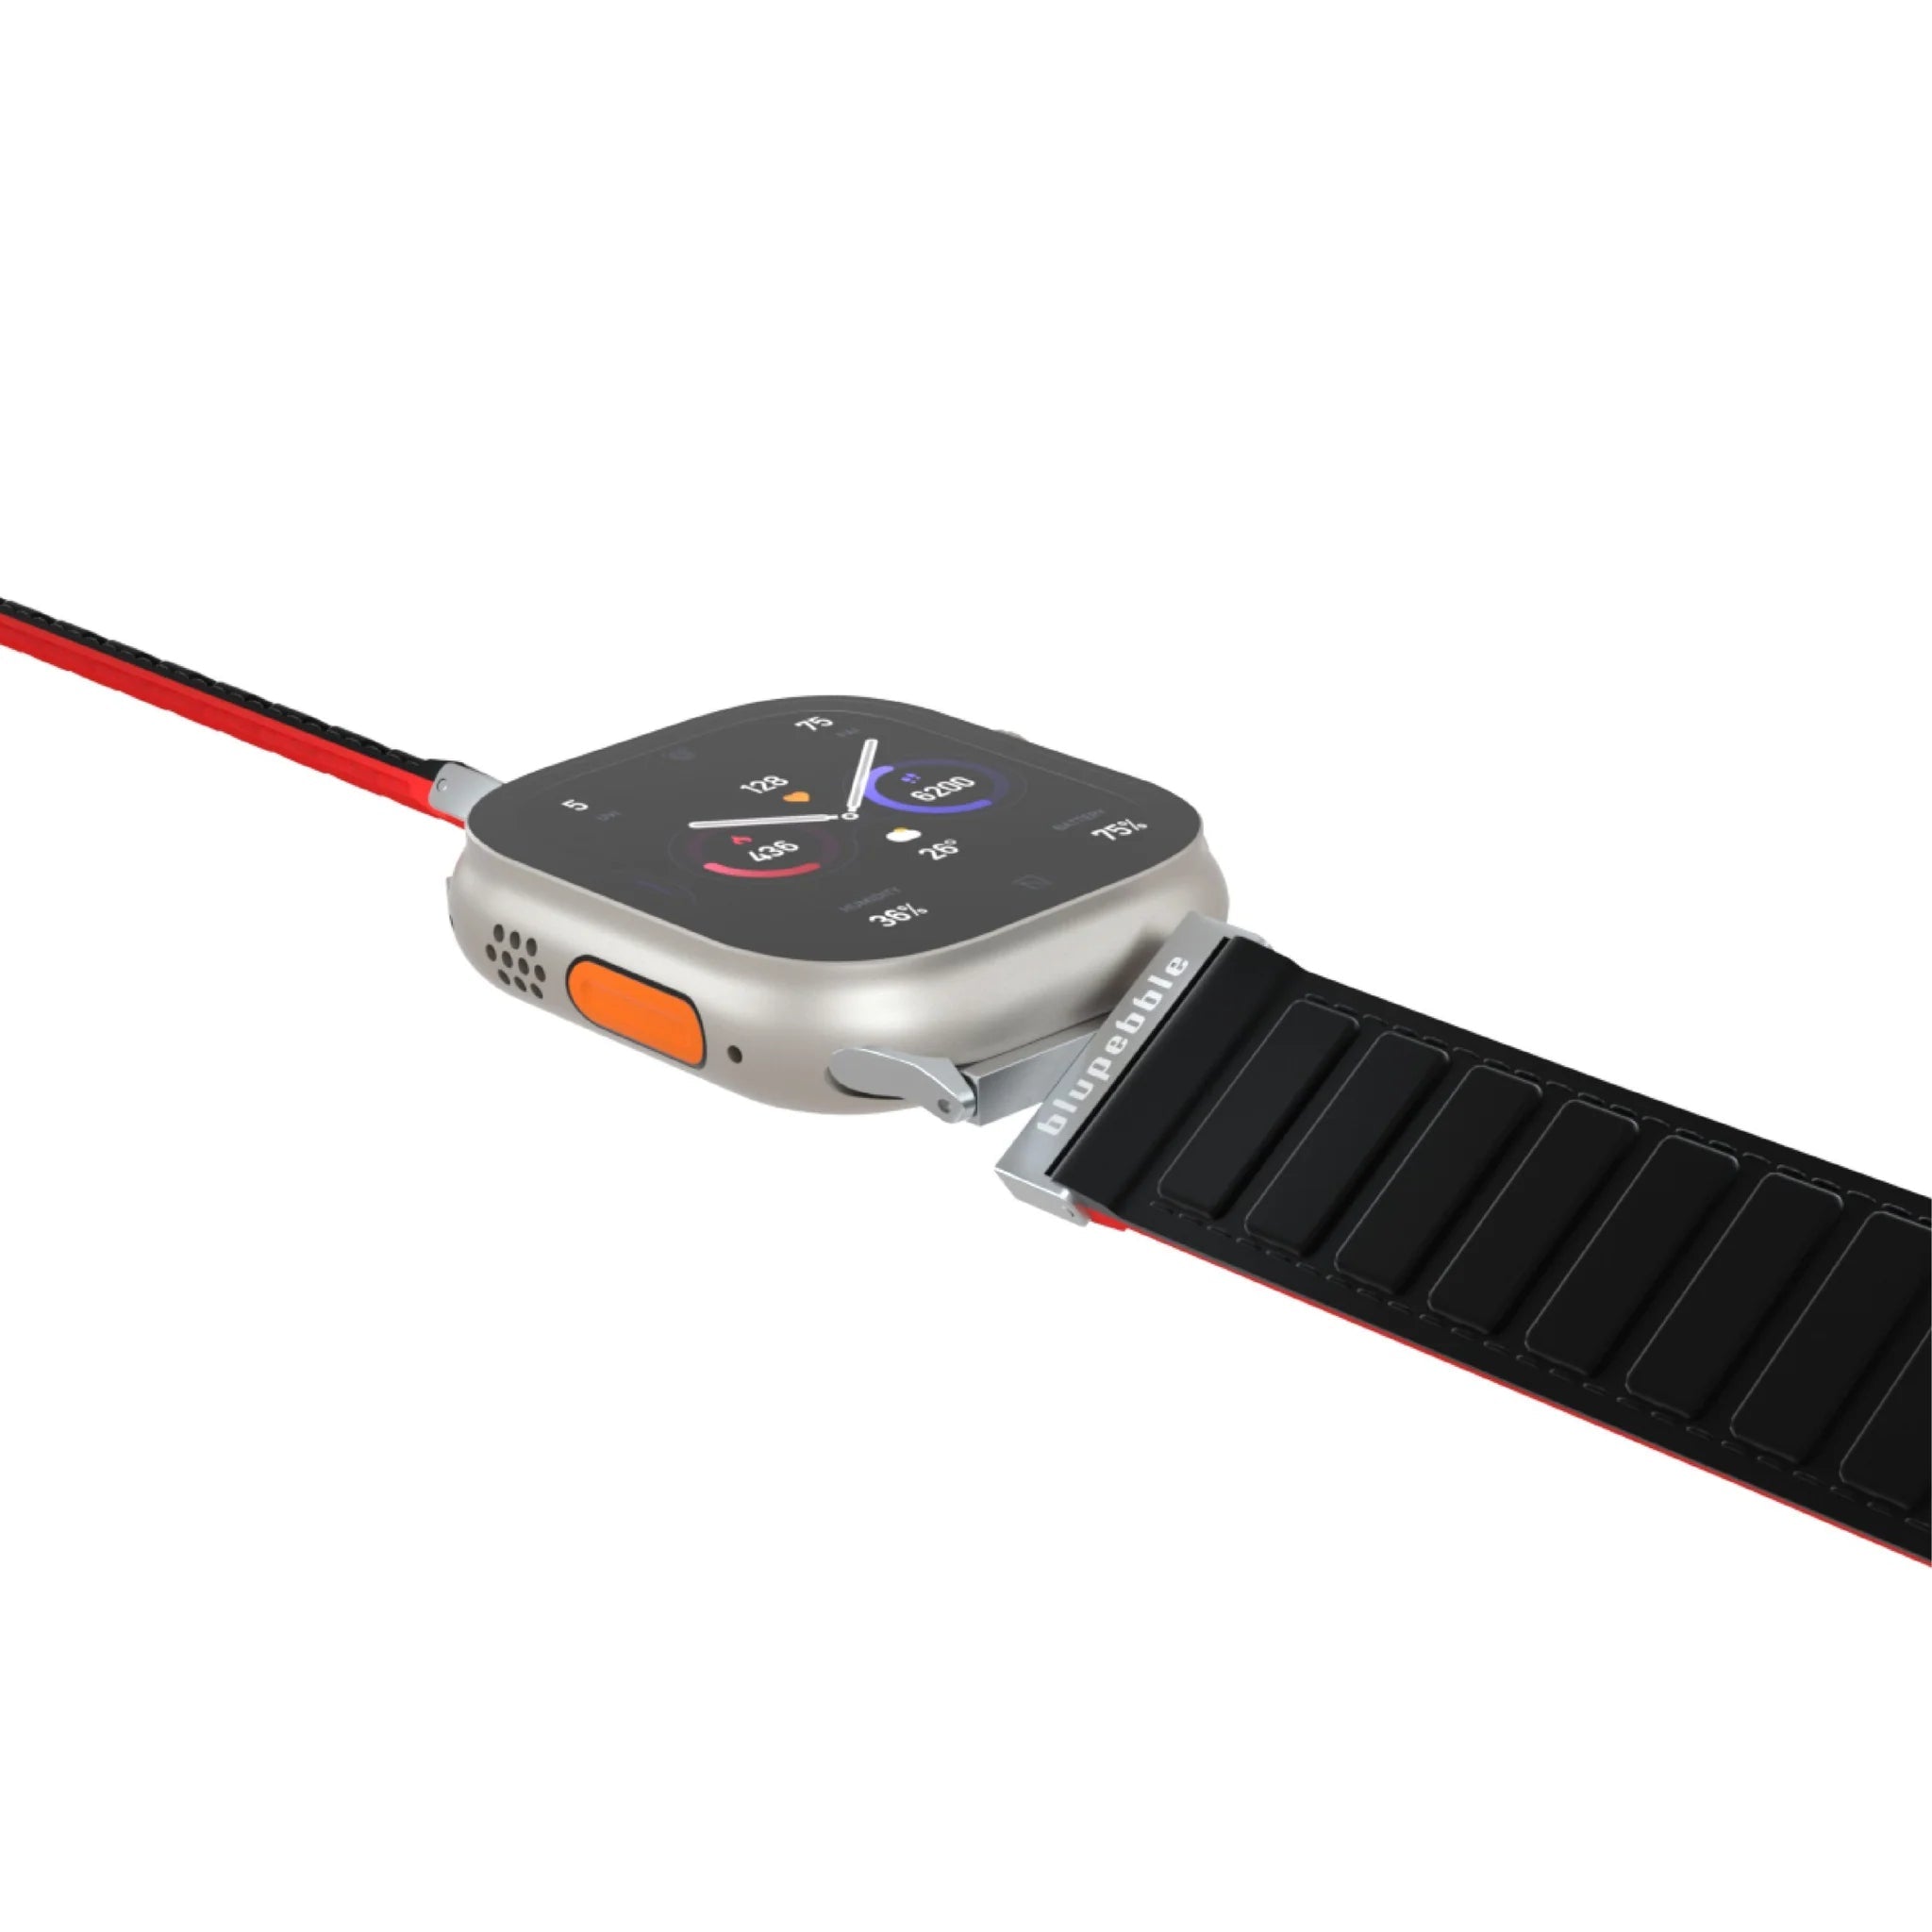 Blupebble Silicone Reversible Magnetic Strap - Black/Red